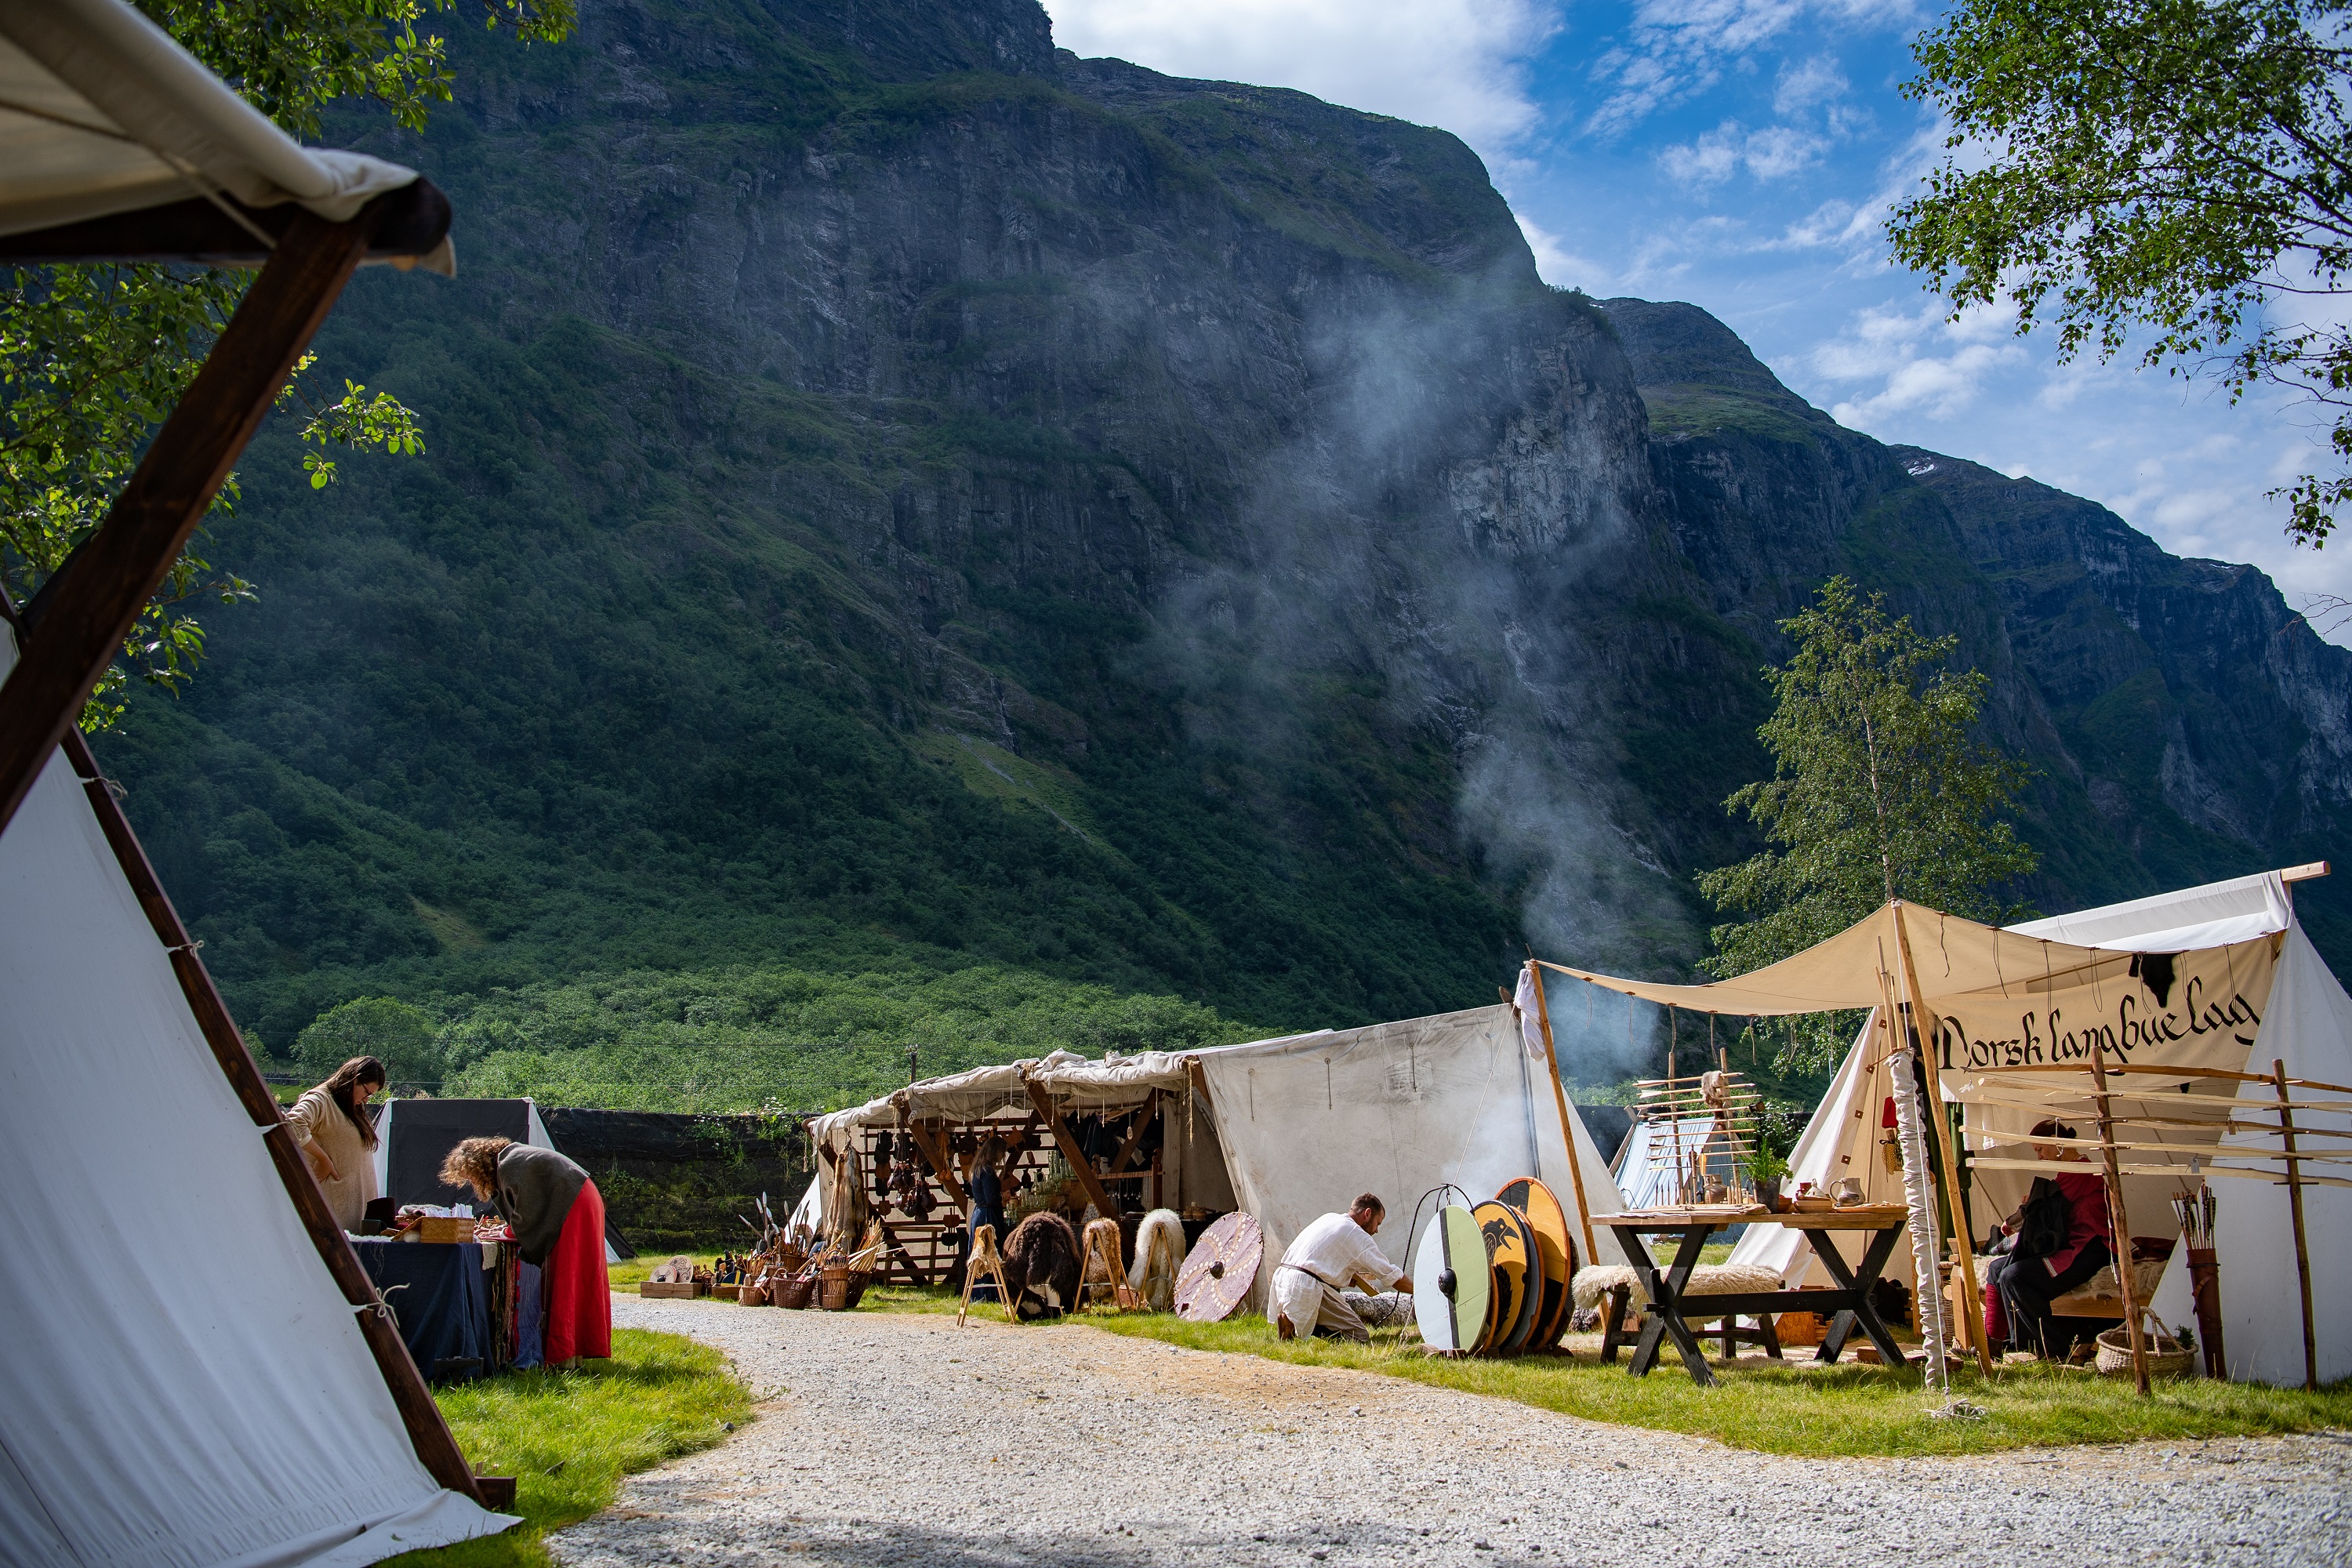 Historic Viking Village is a hidden haven for shoppers and seafood